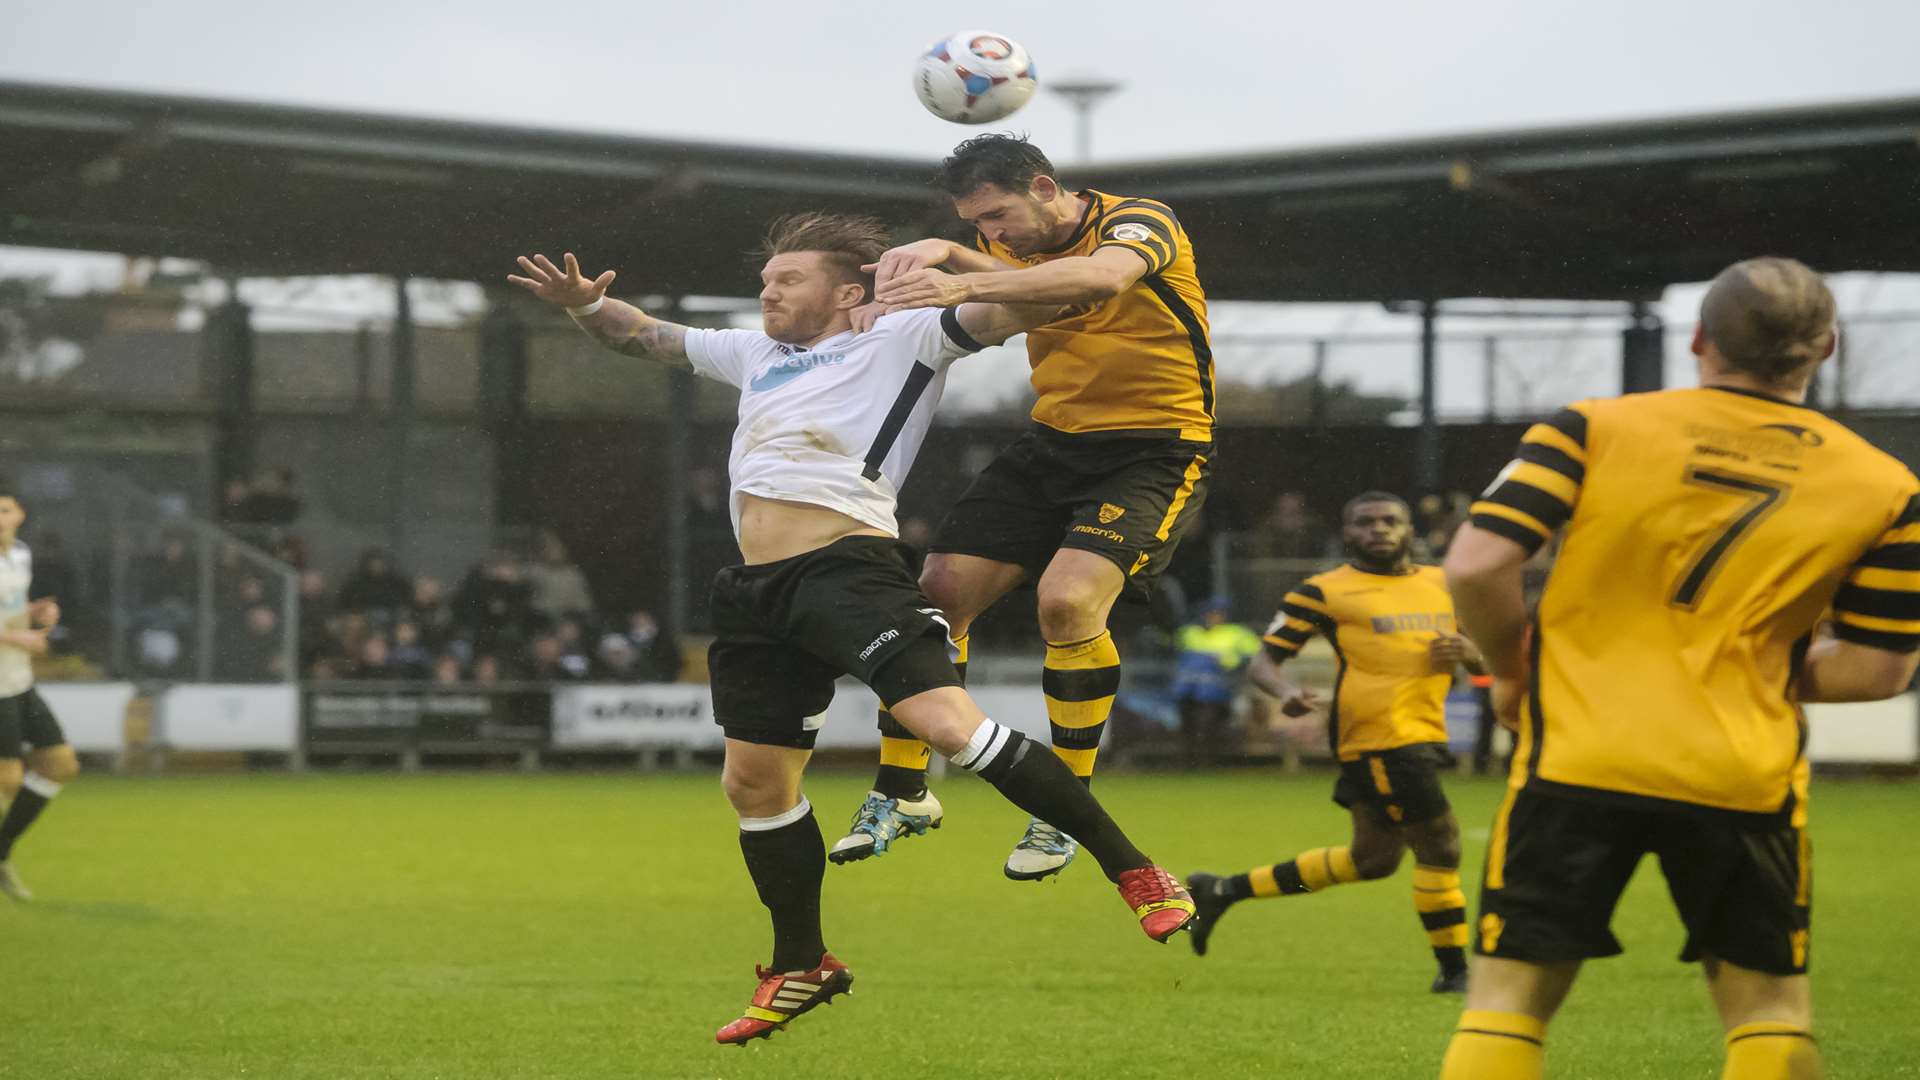 Elliot Bradbrook challenges Jay May during Dartford's 1-1 draw with Maidstone Picture: Andy Payton